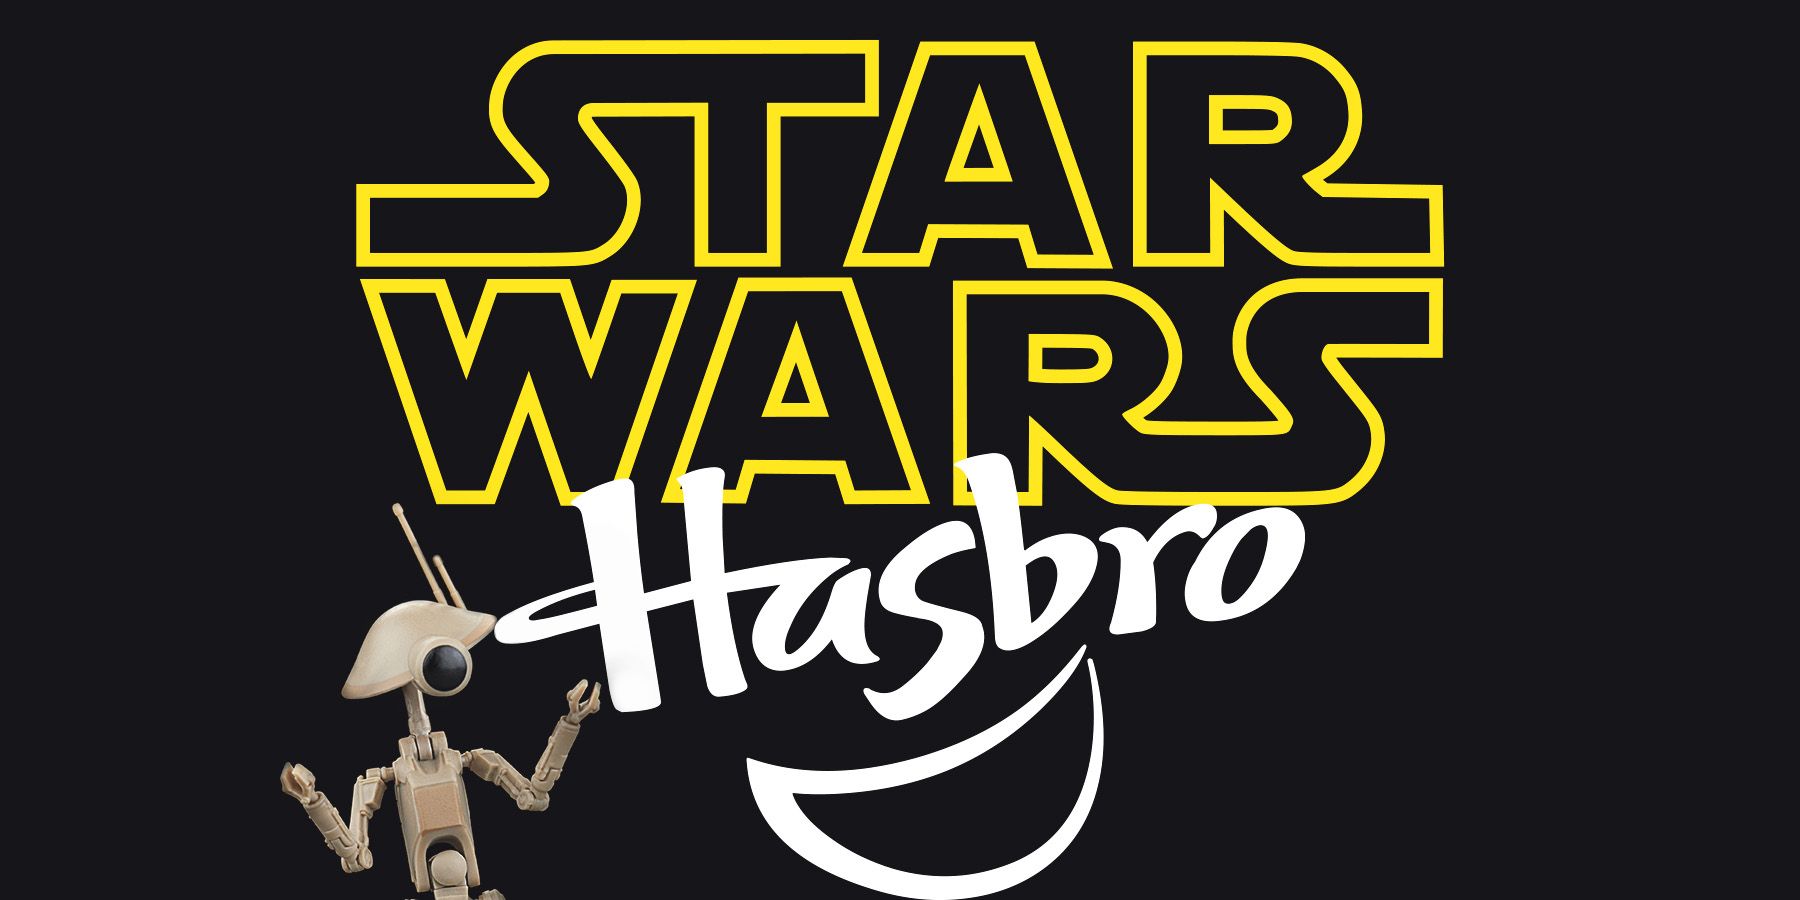 Star Wars and Hasbro logos next to The Black Series pit droid